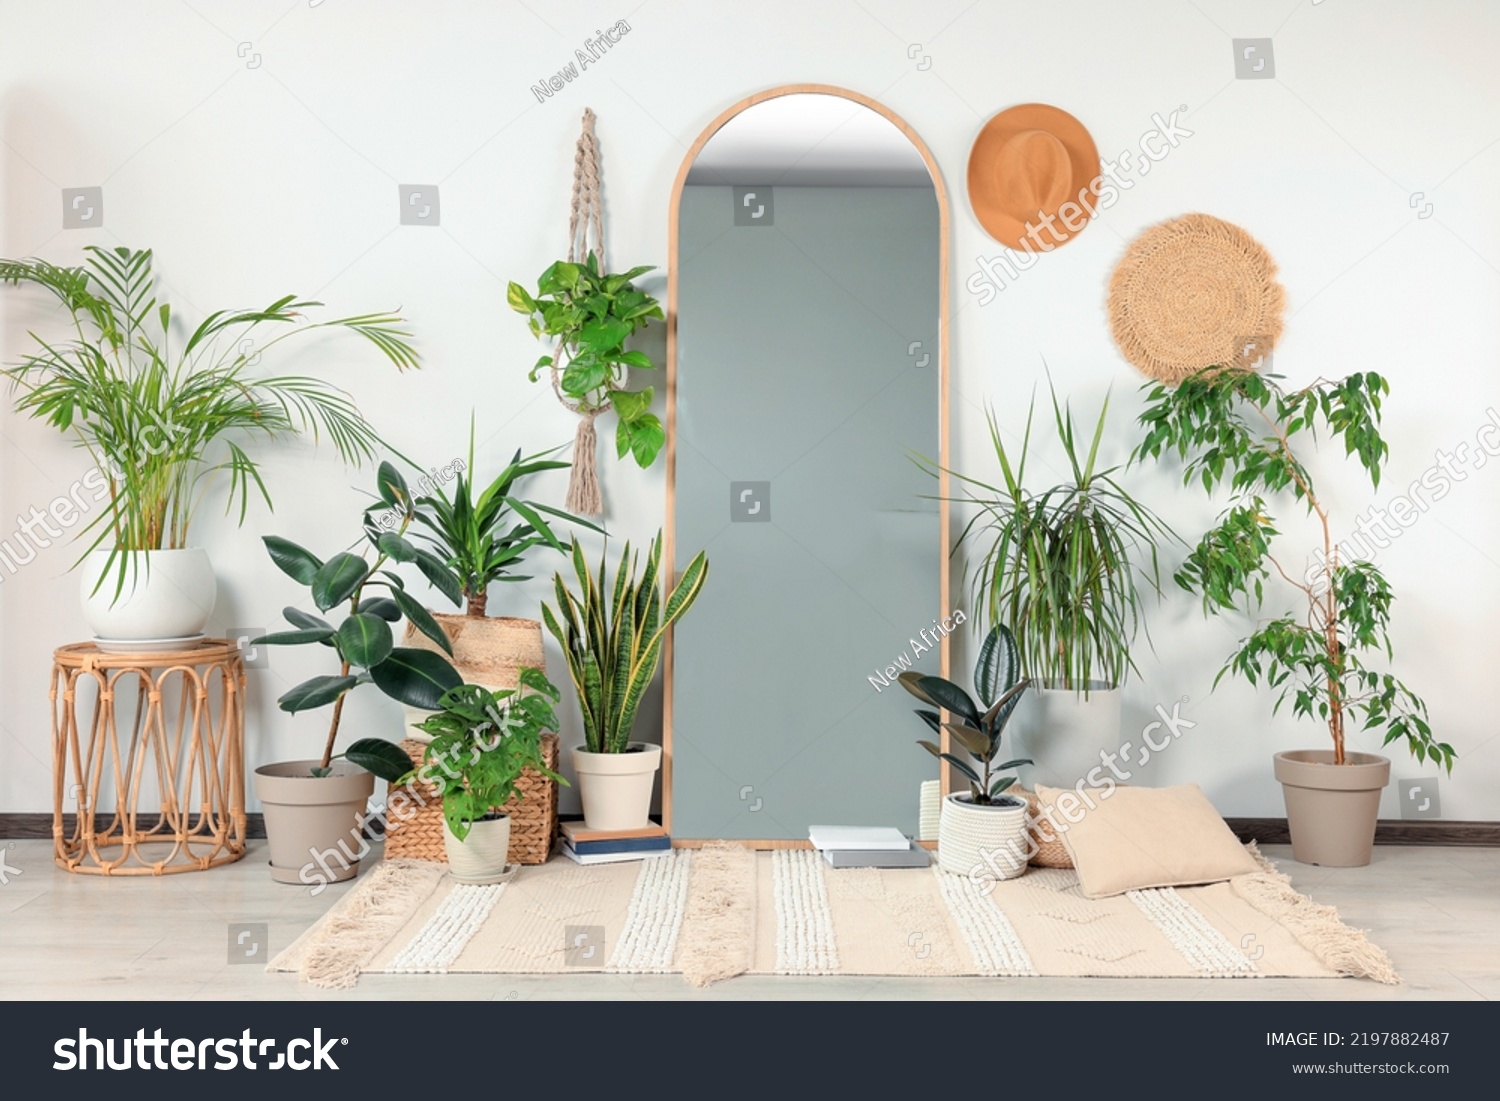 Stylish full length mirror and different houseplants near white wall in room #2197882487